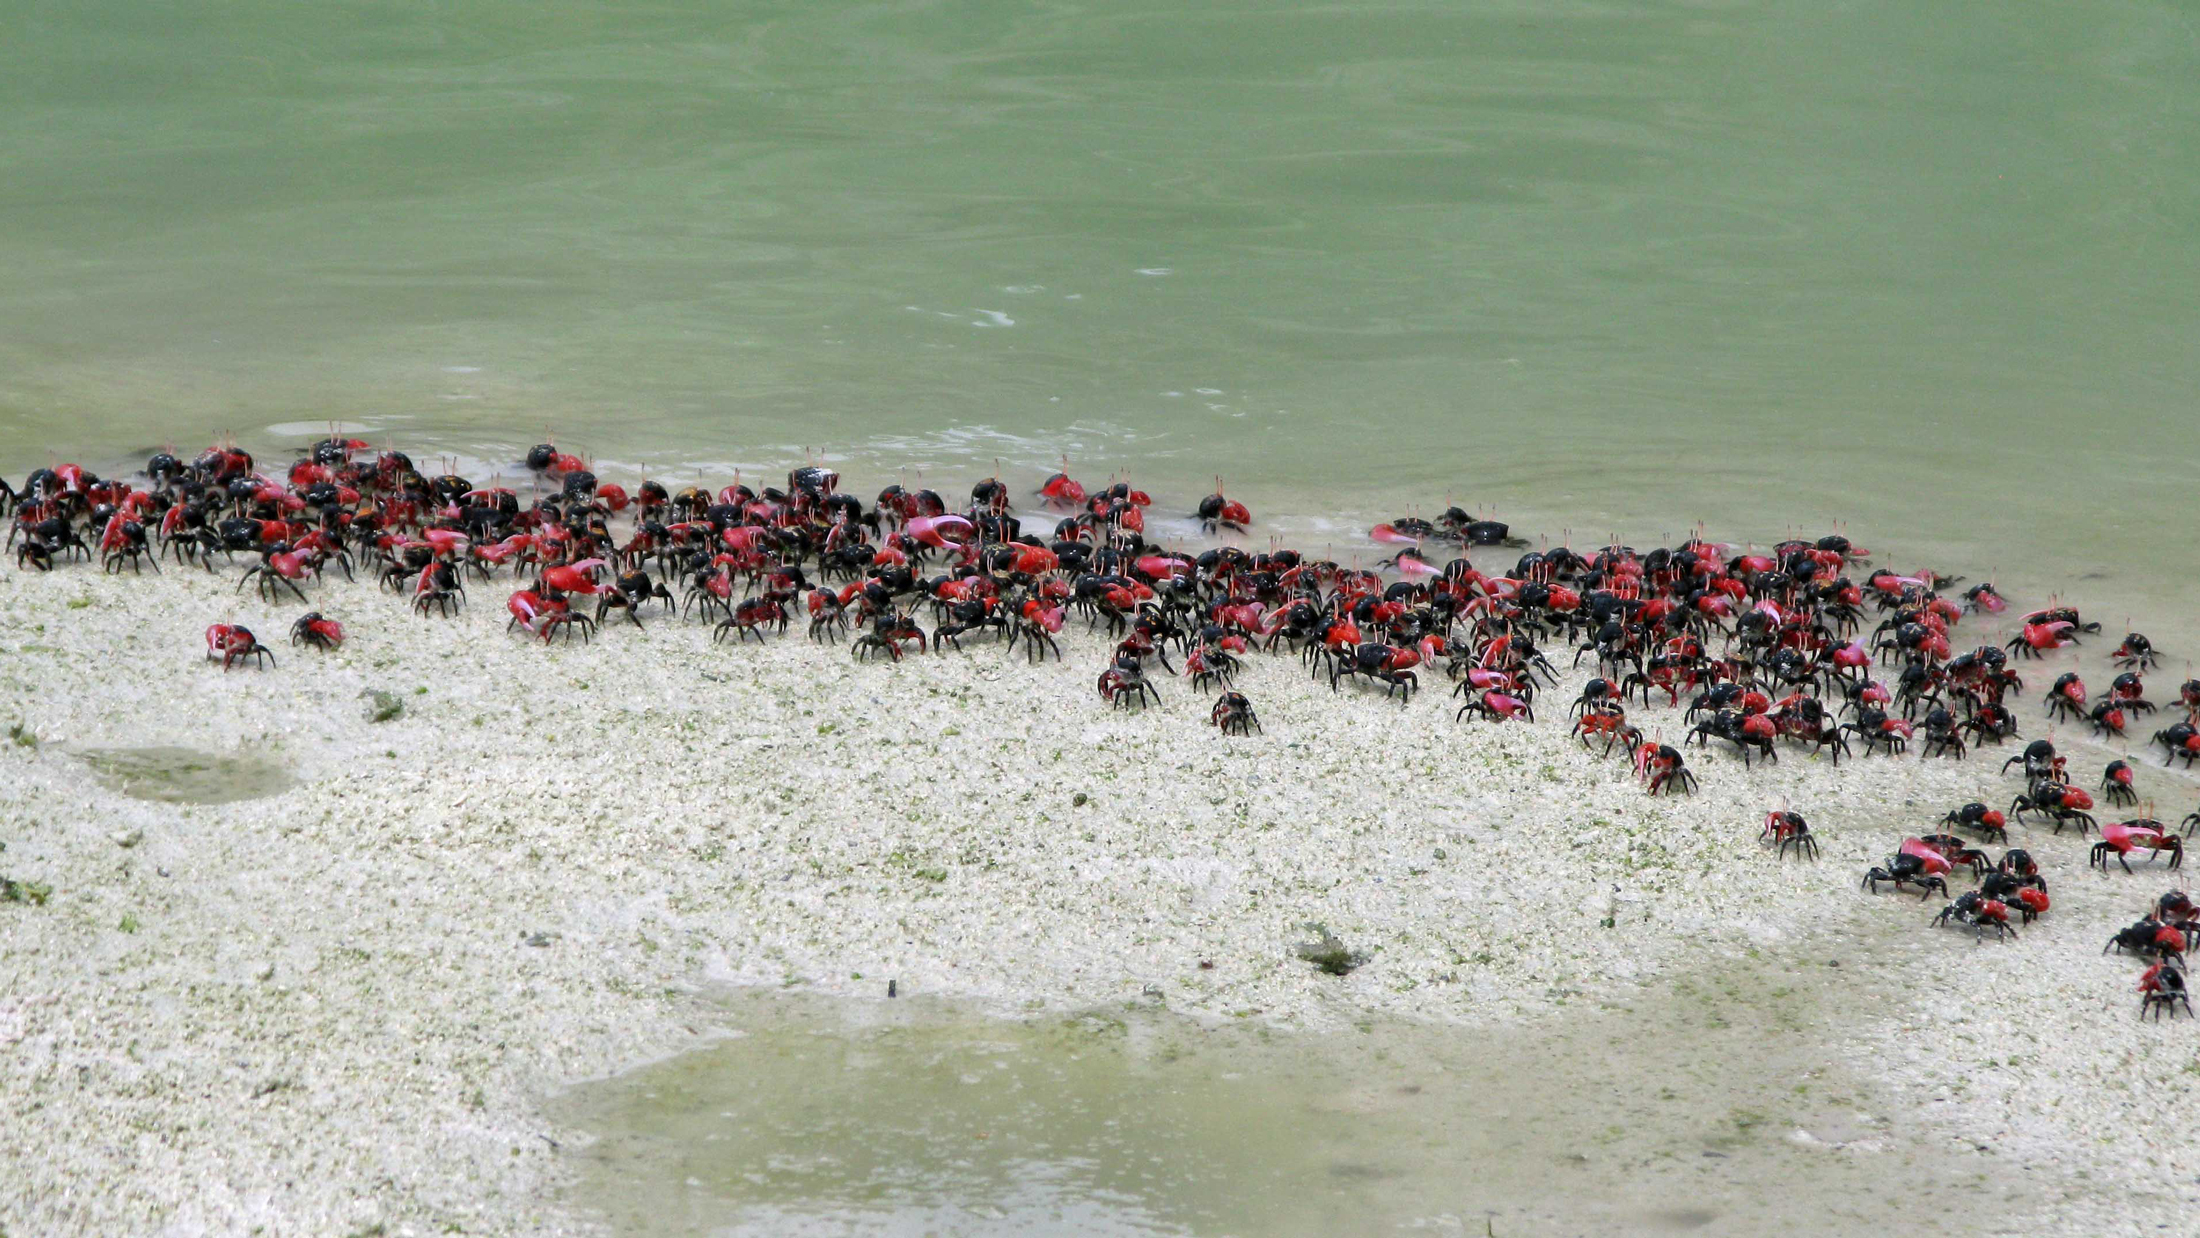 Crowds of fiddler crabs. Photo © Kydd Pollock